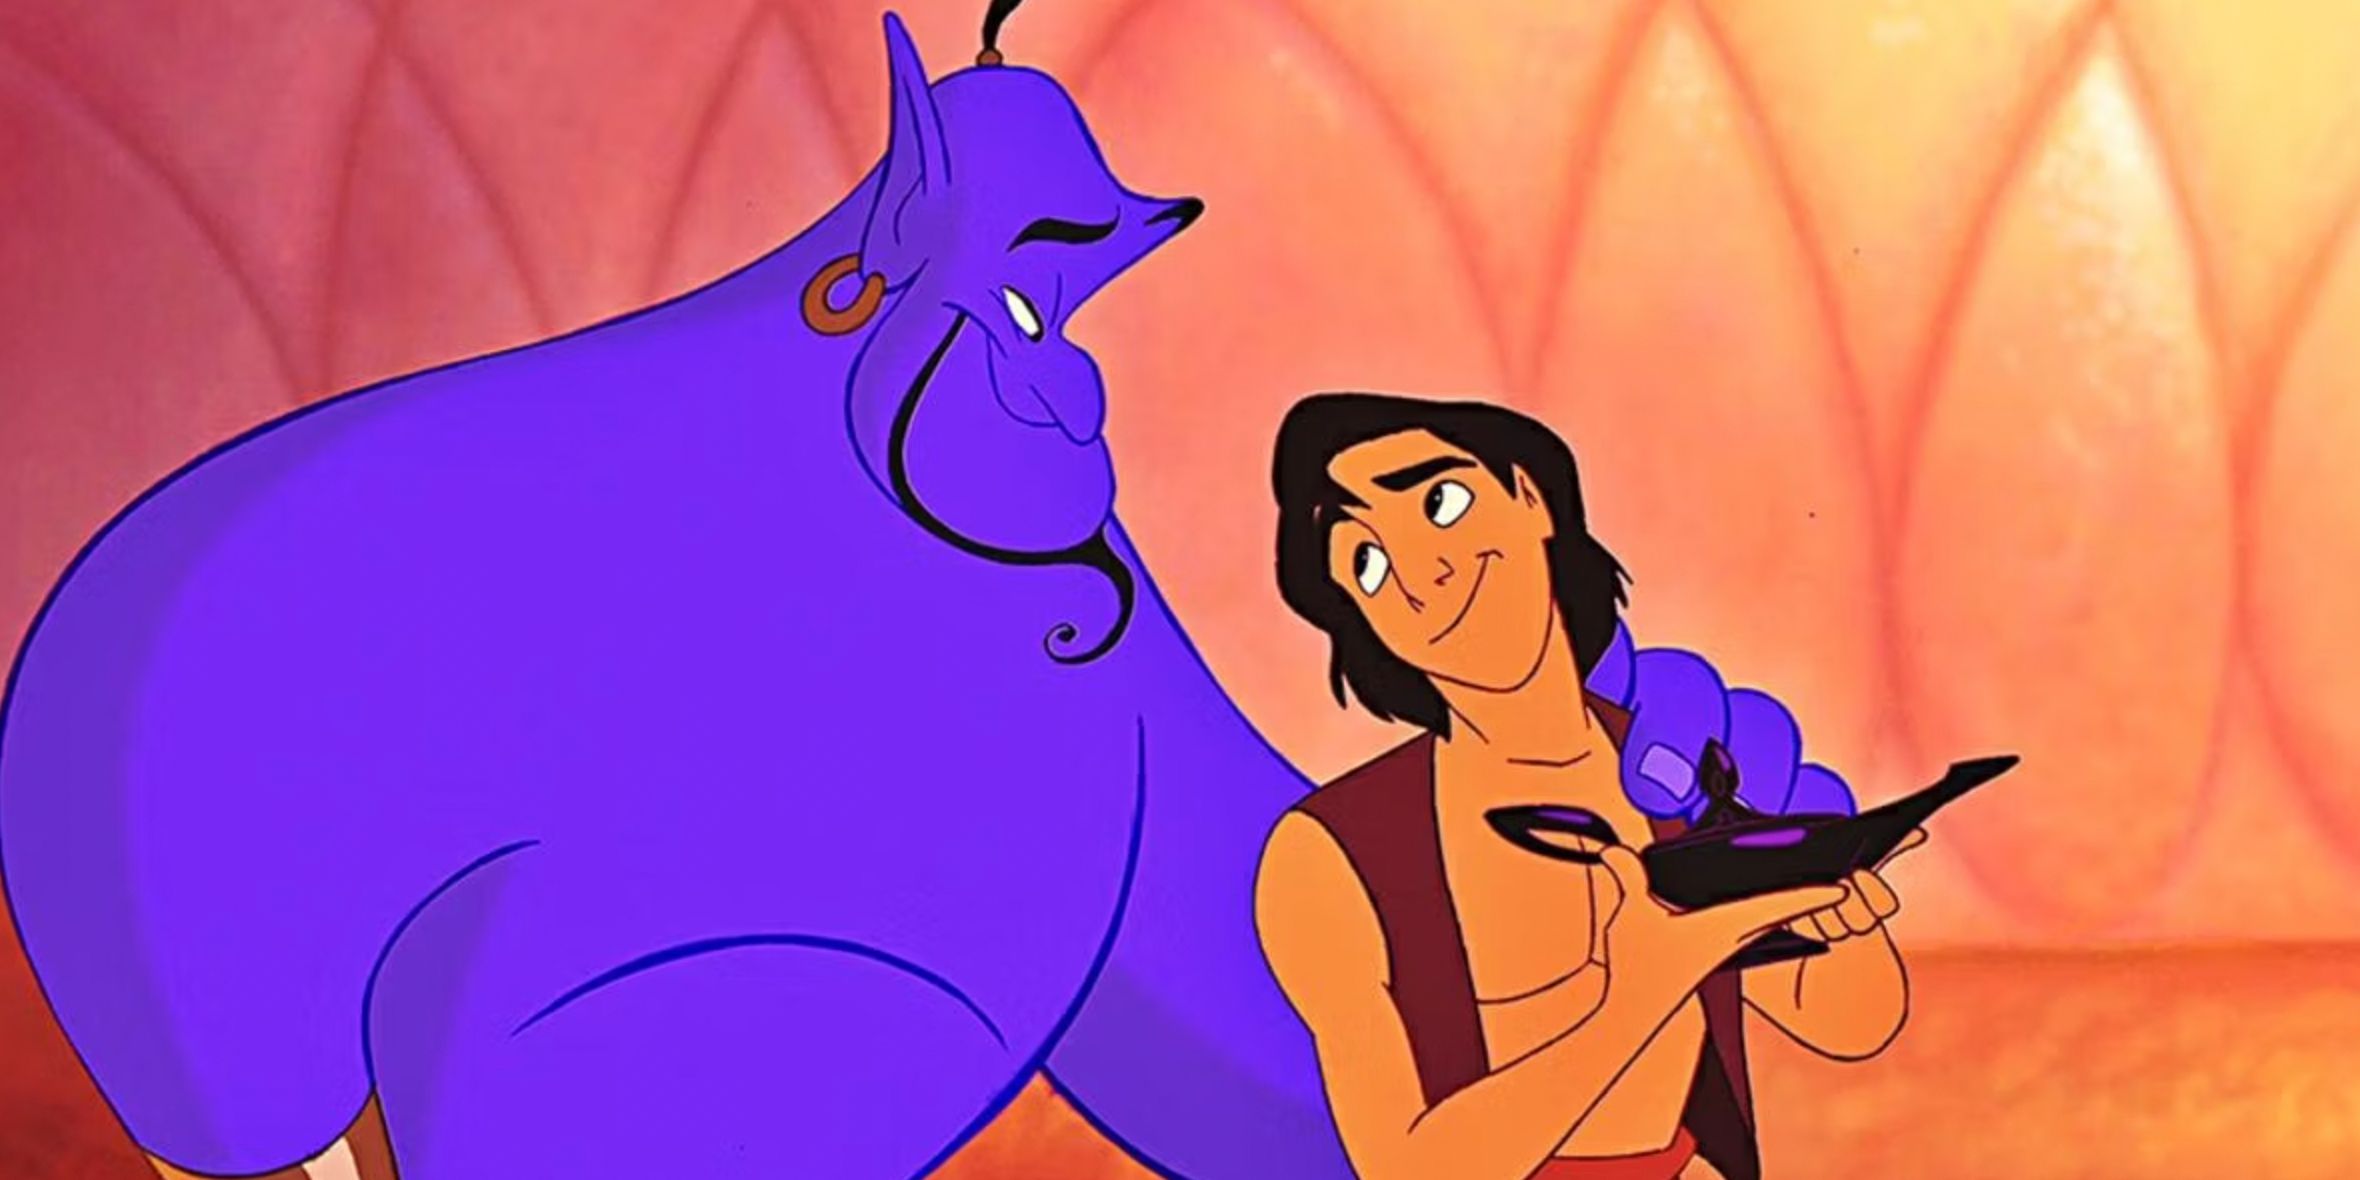 Genie with his arm around Aladdin in the animated movie